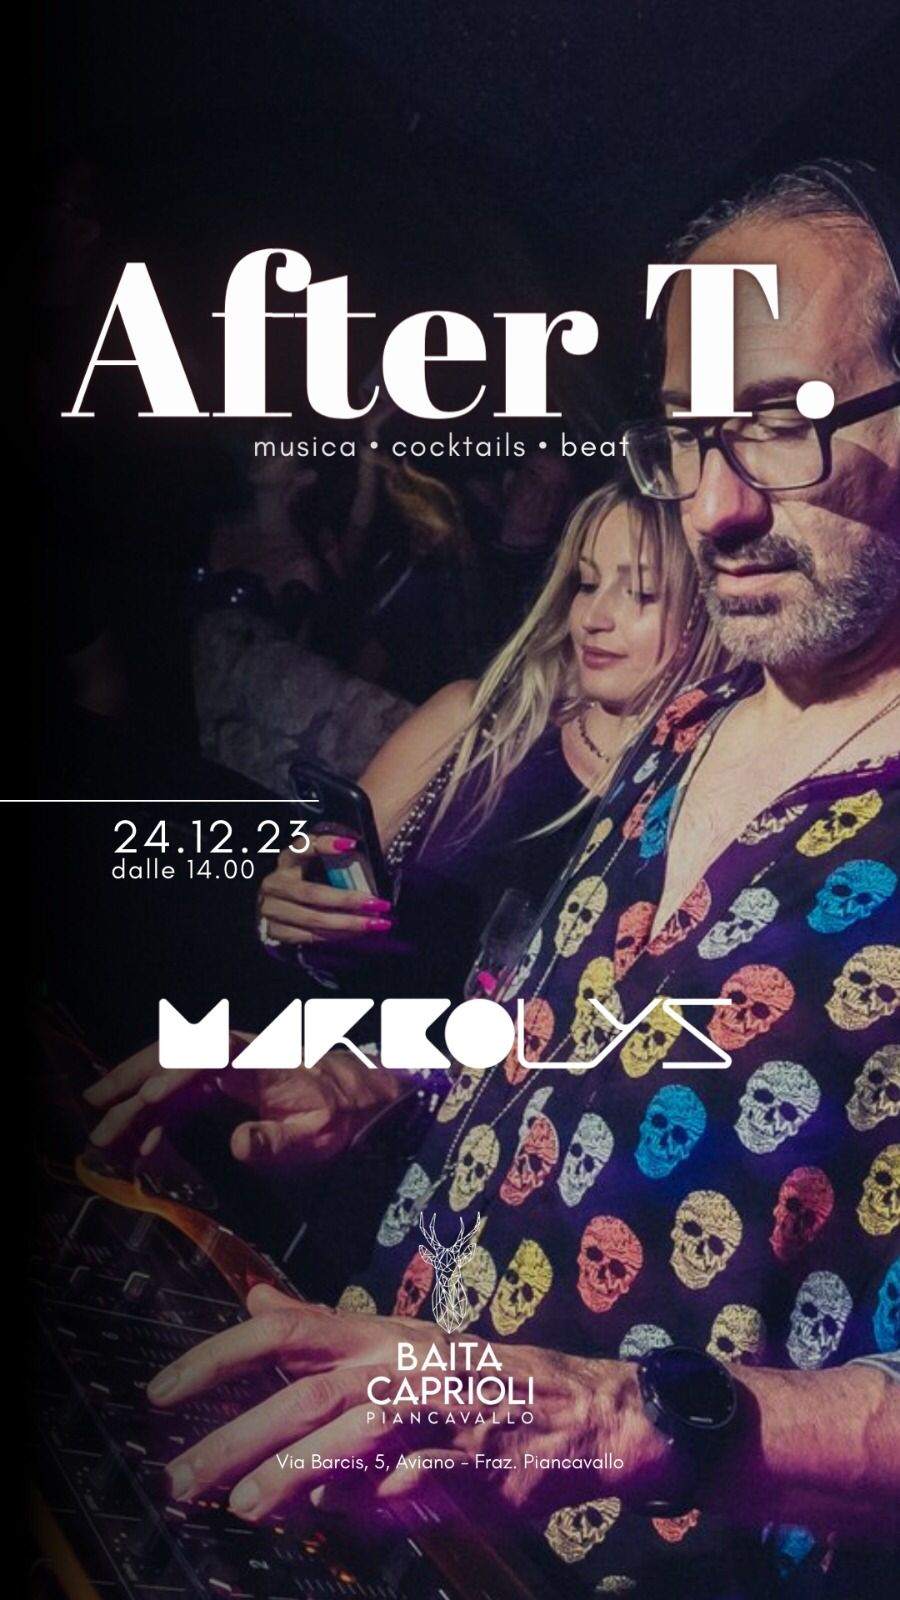 Marco Lys at After T - フライヤー表